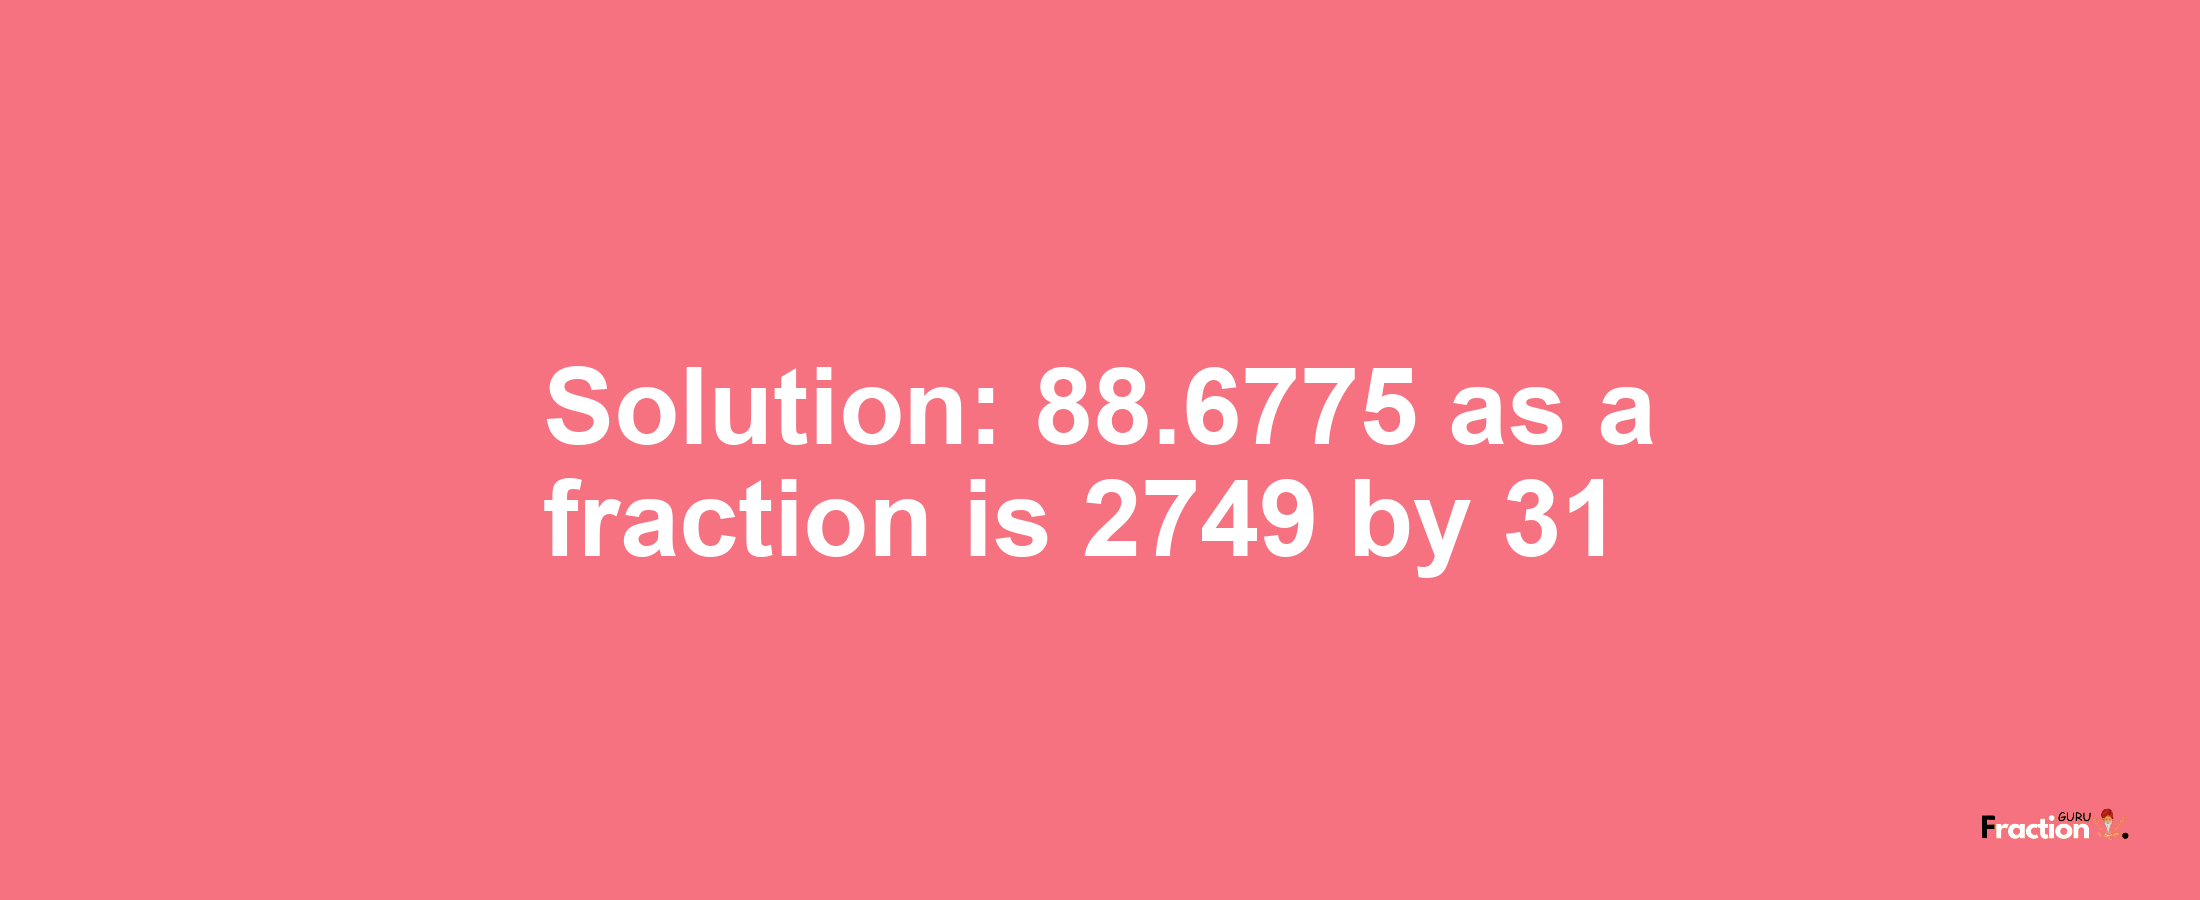 Solution:88.6775 as a fraction is 2749/31